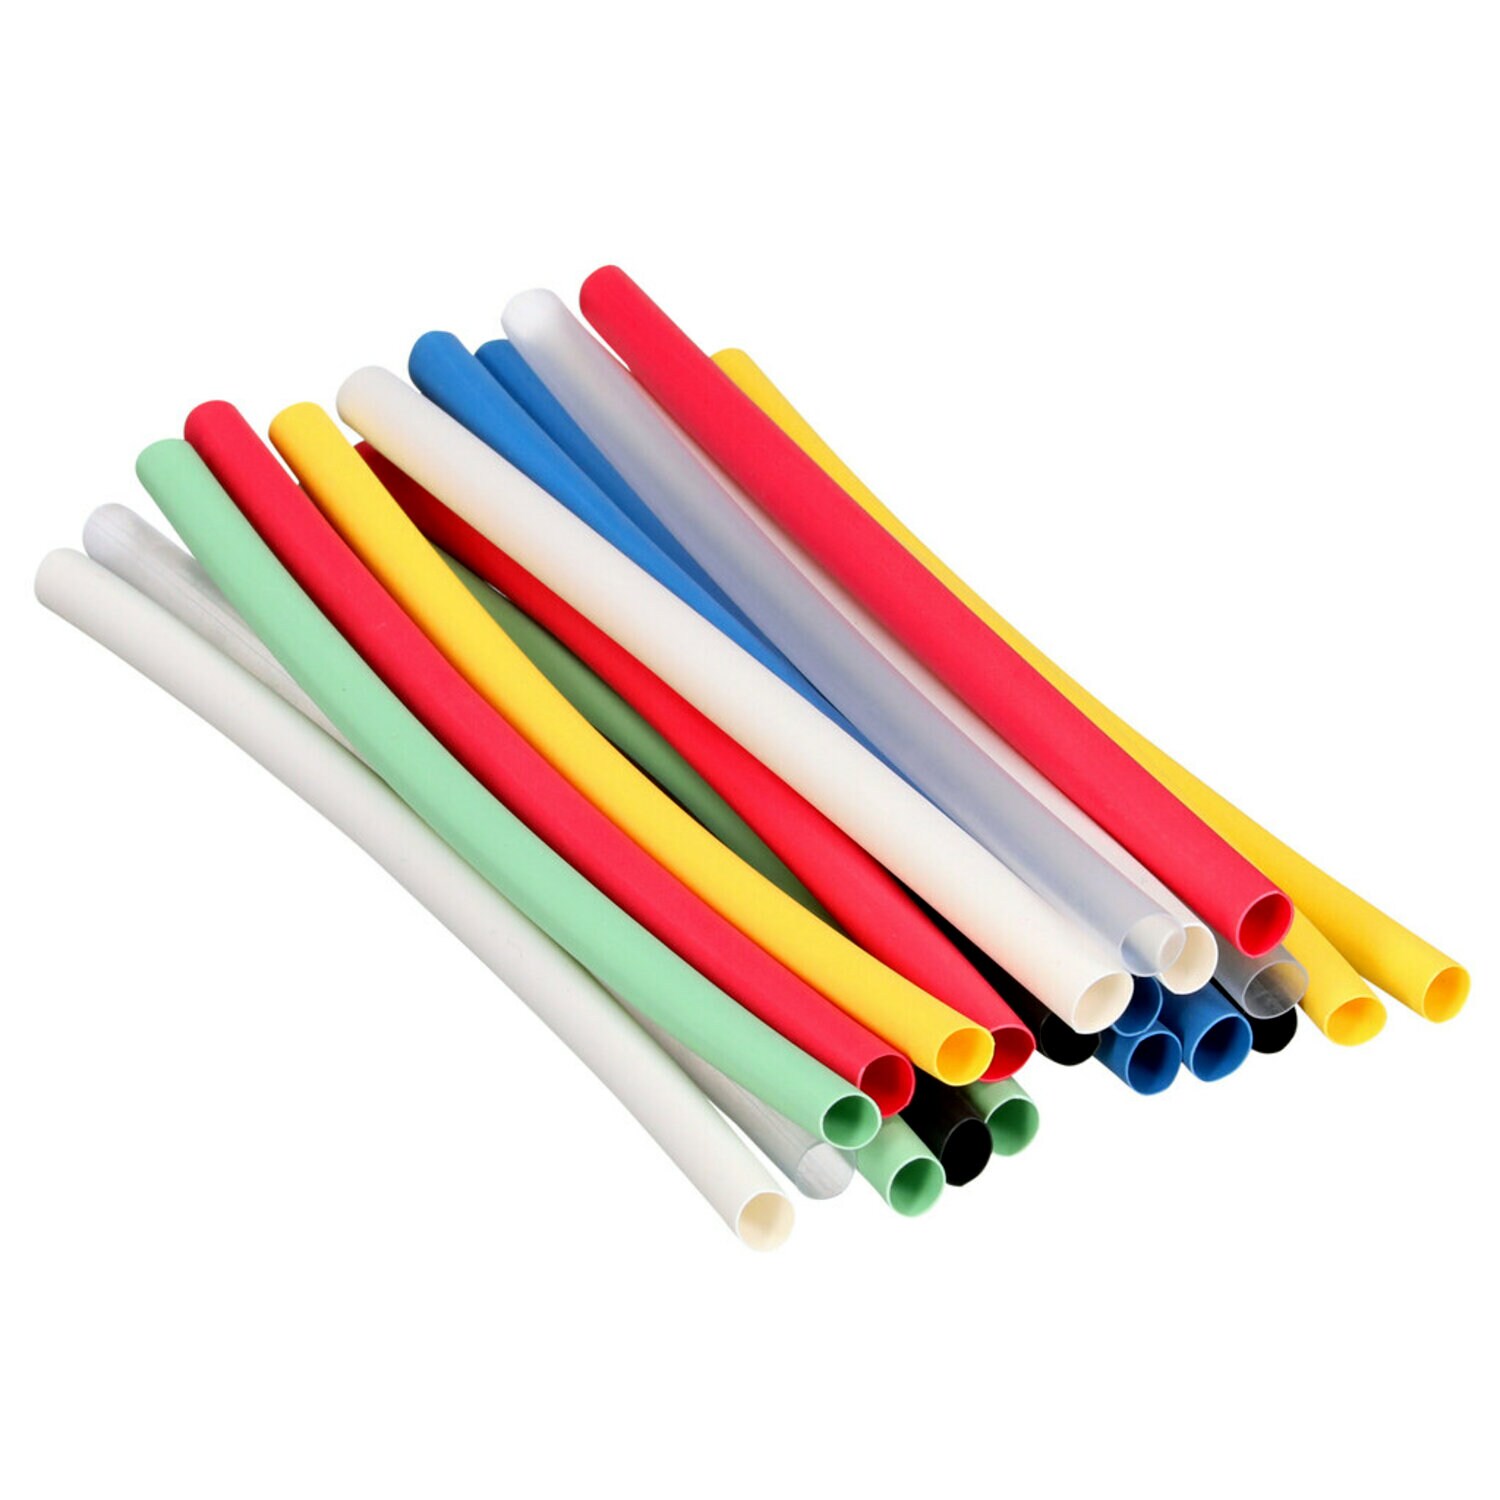 7000132601 - 3M Heat Shrink Thin Wall Tubing Assortment Pack FP-301-1/4-Assort
colors, 6" pieces, 3 Each of 7 Color, 10 pieces/case